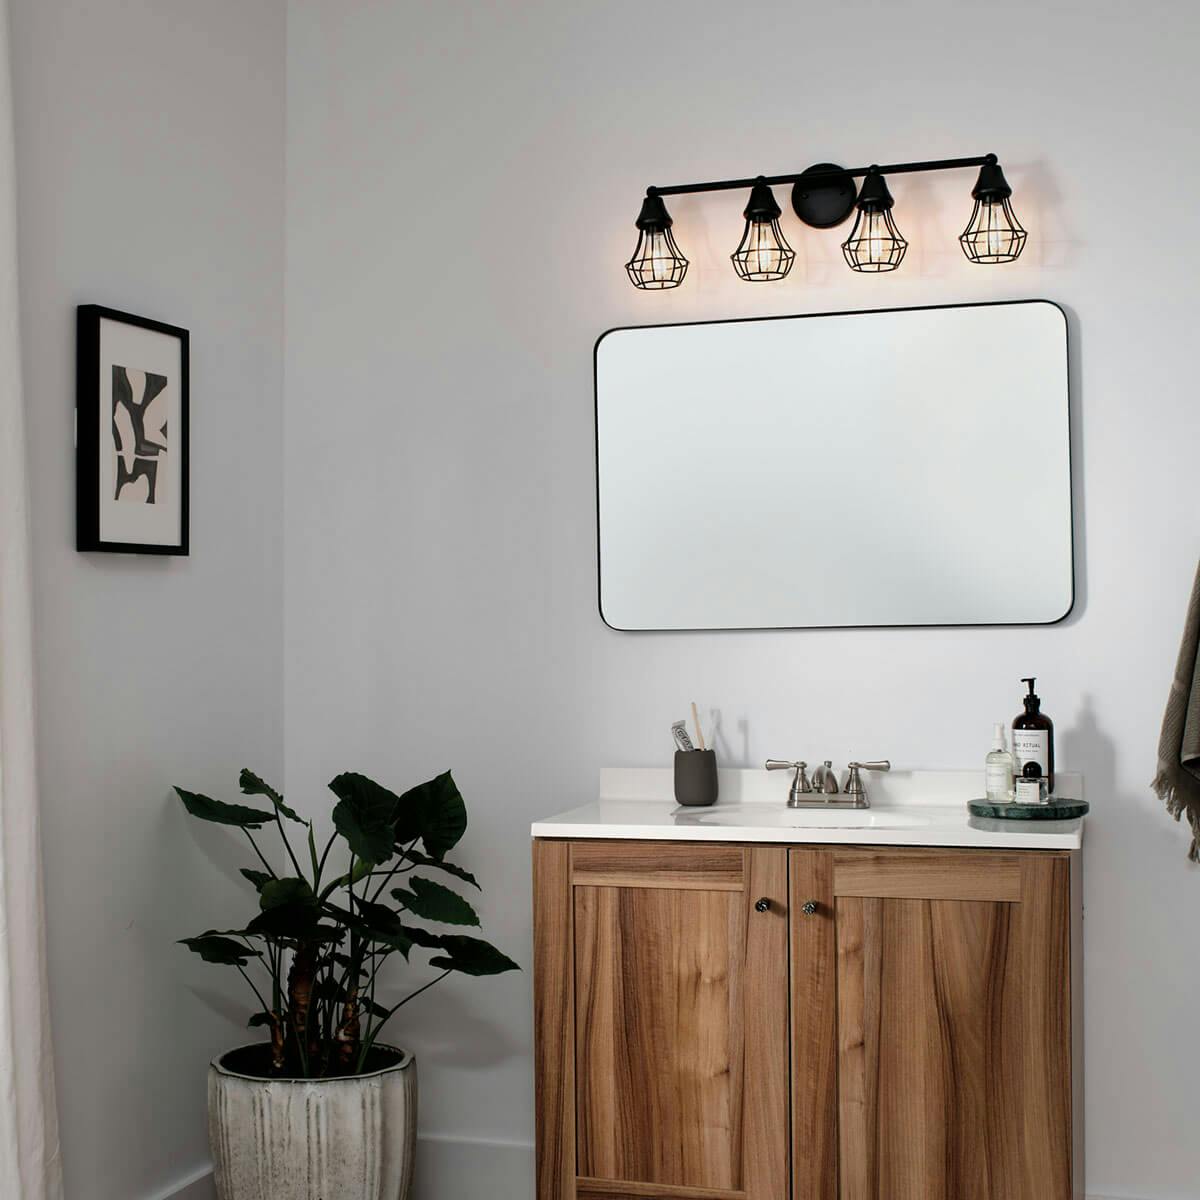 Day time Bathroom featuring Bayley vanity light 37508BK